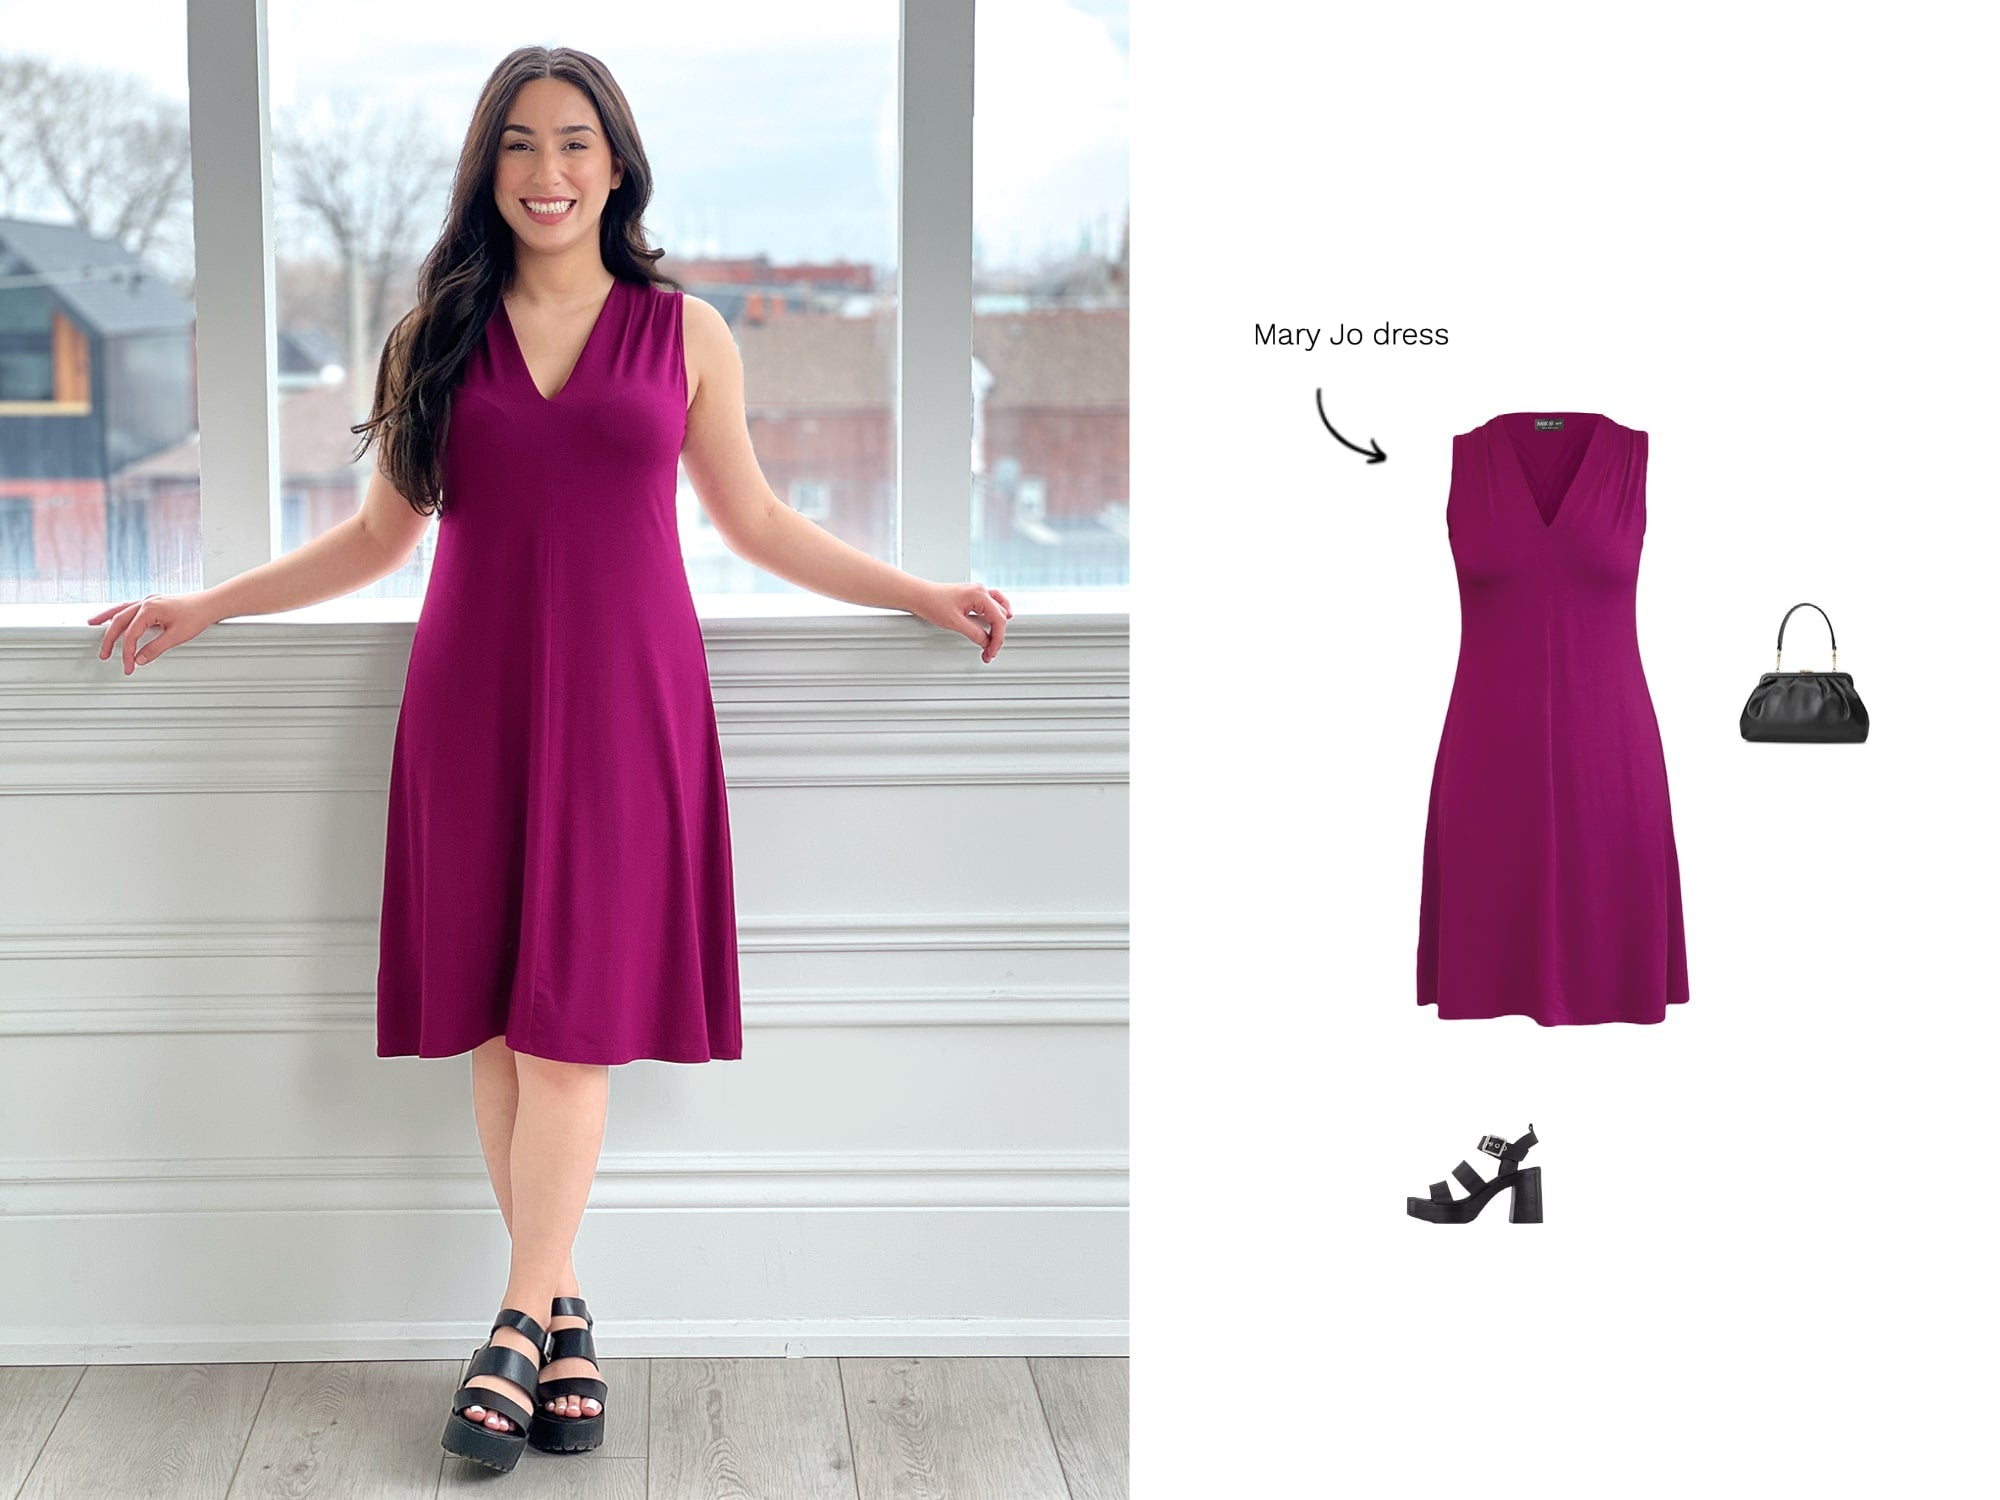 Image of Miik model wearing a Mary jo sleeveless v neck dress in ruby, with the off figures of her outfit to the right.